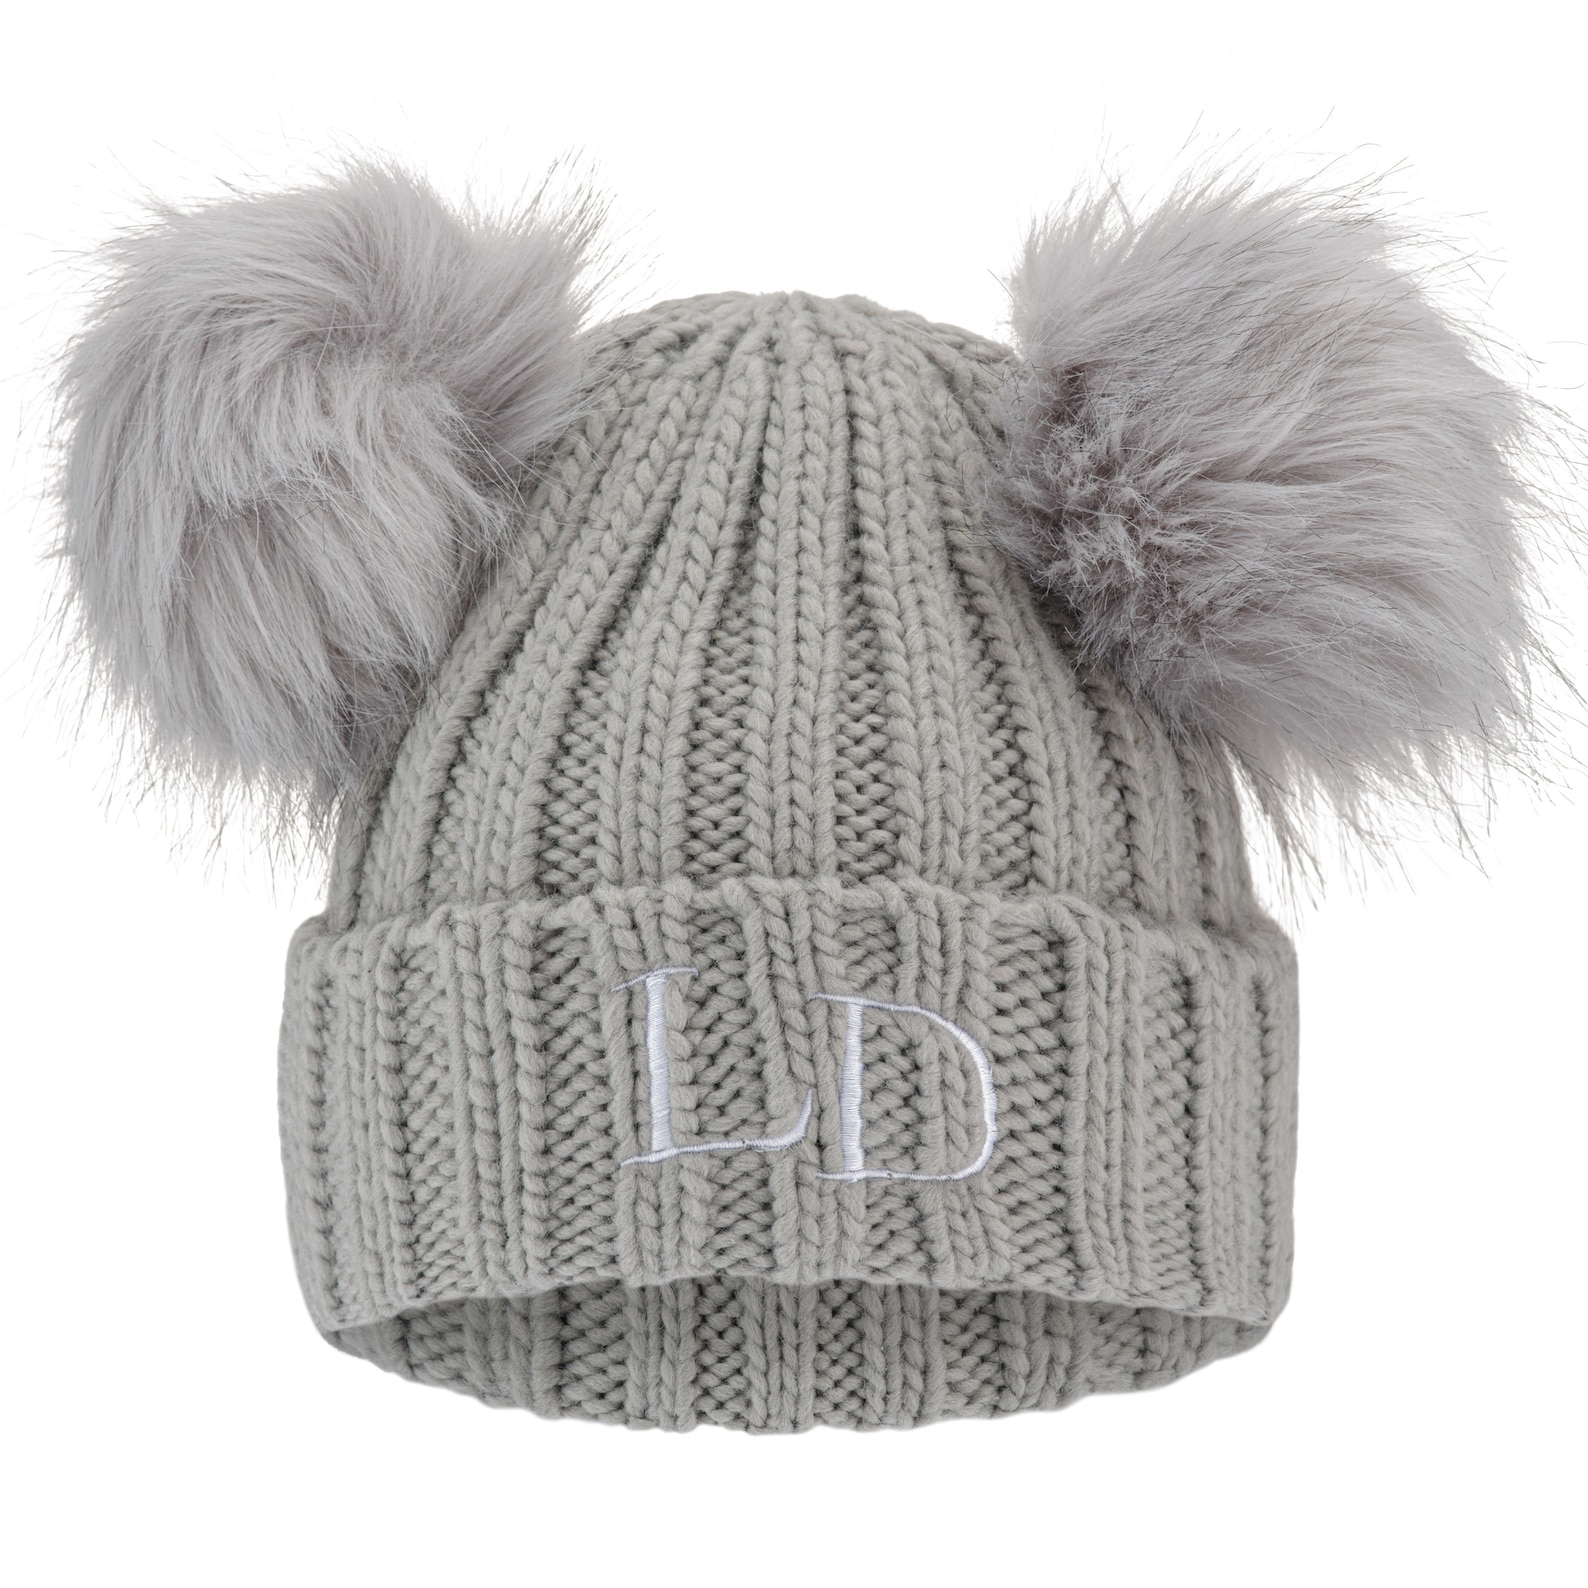 Personalized Embroidery Kid & Adult Pom Pom Hat for Comfort & Unique | INKid07